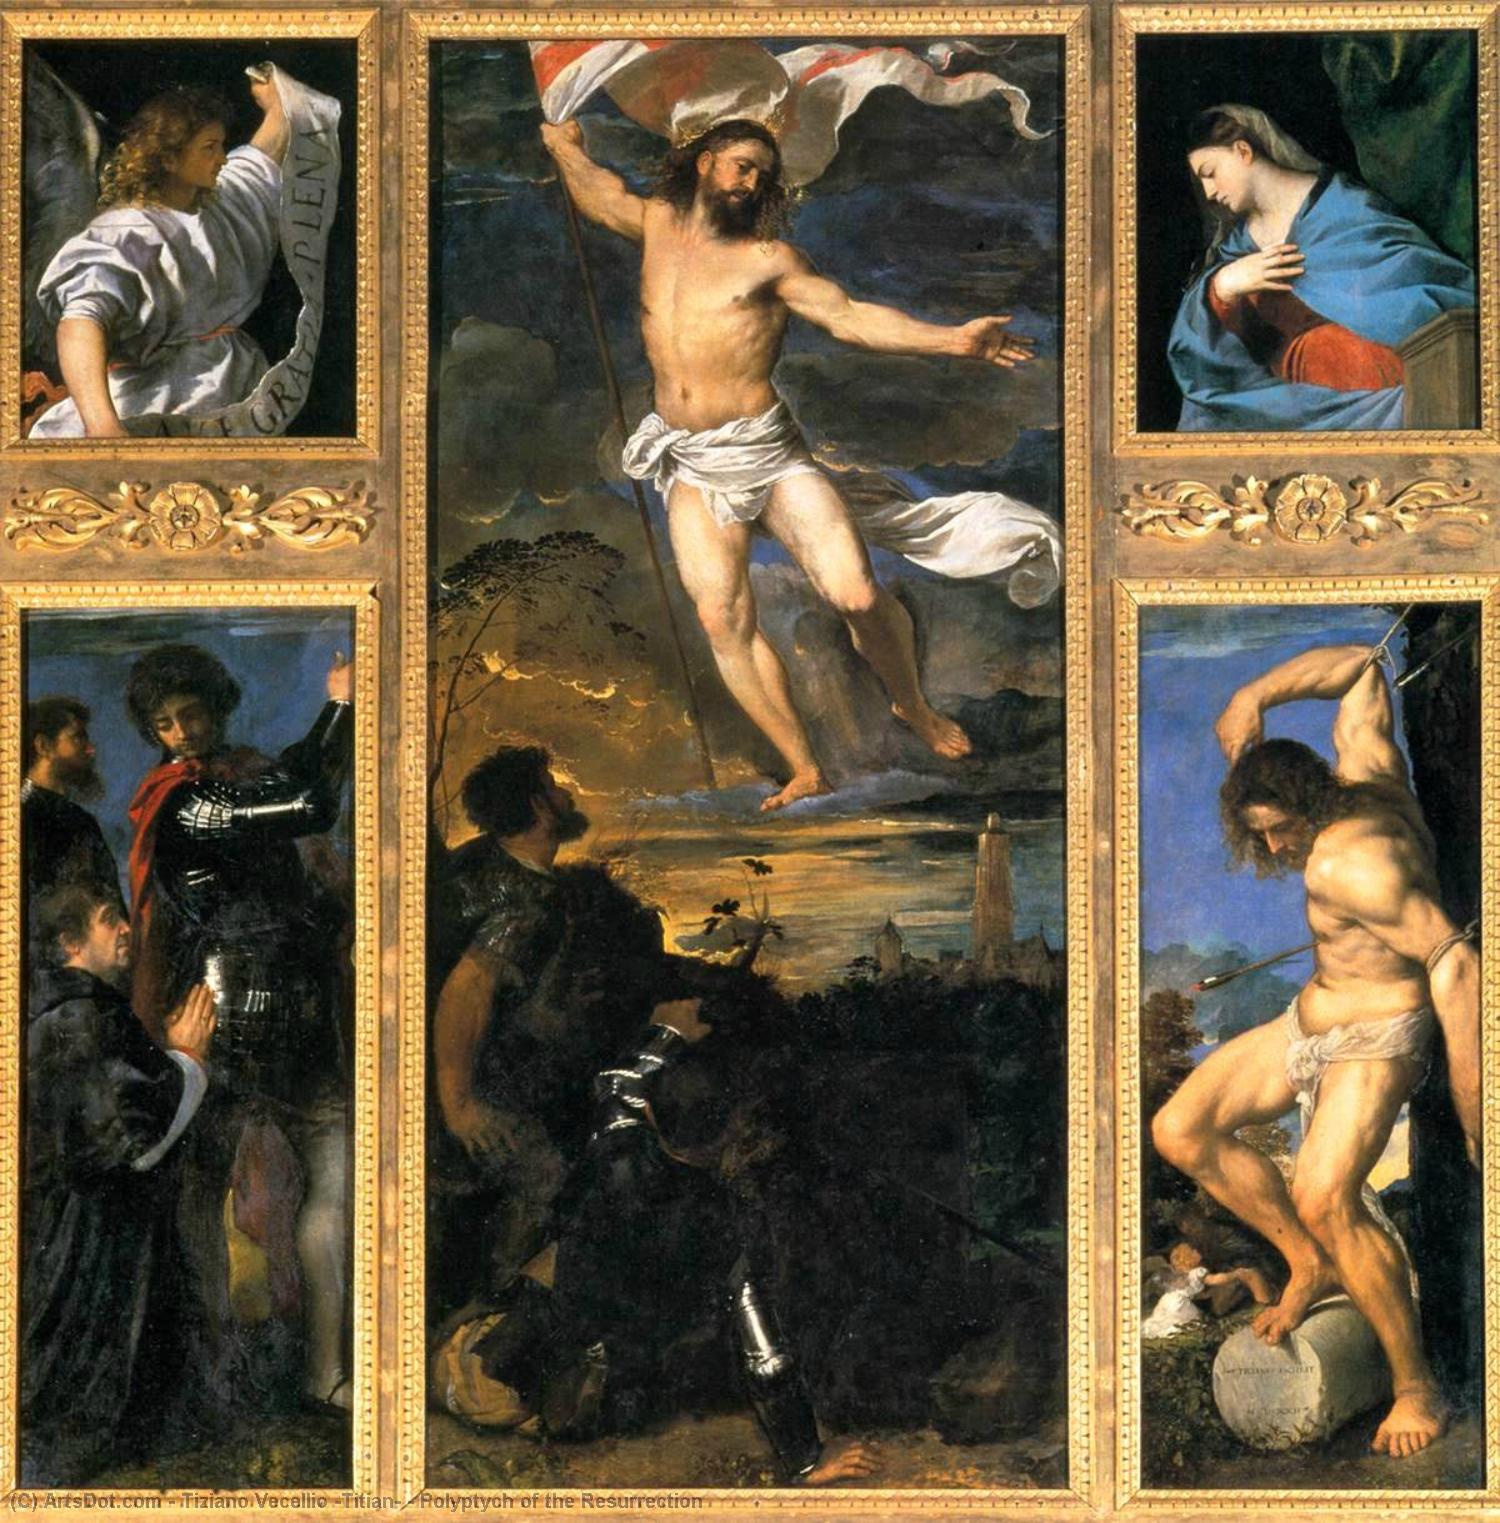 WikiOO.org - 백과 사전 - 회화, 삽화 Tiziano Vecellio (Titian) - Polyptych of the Resurrection